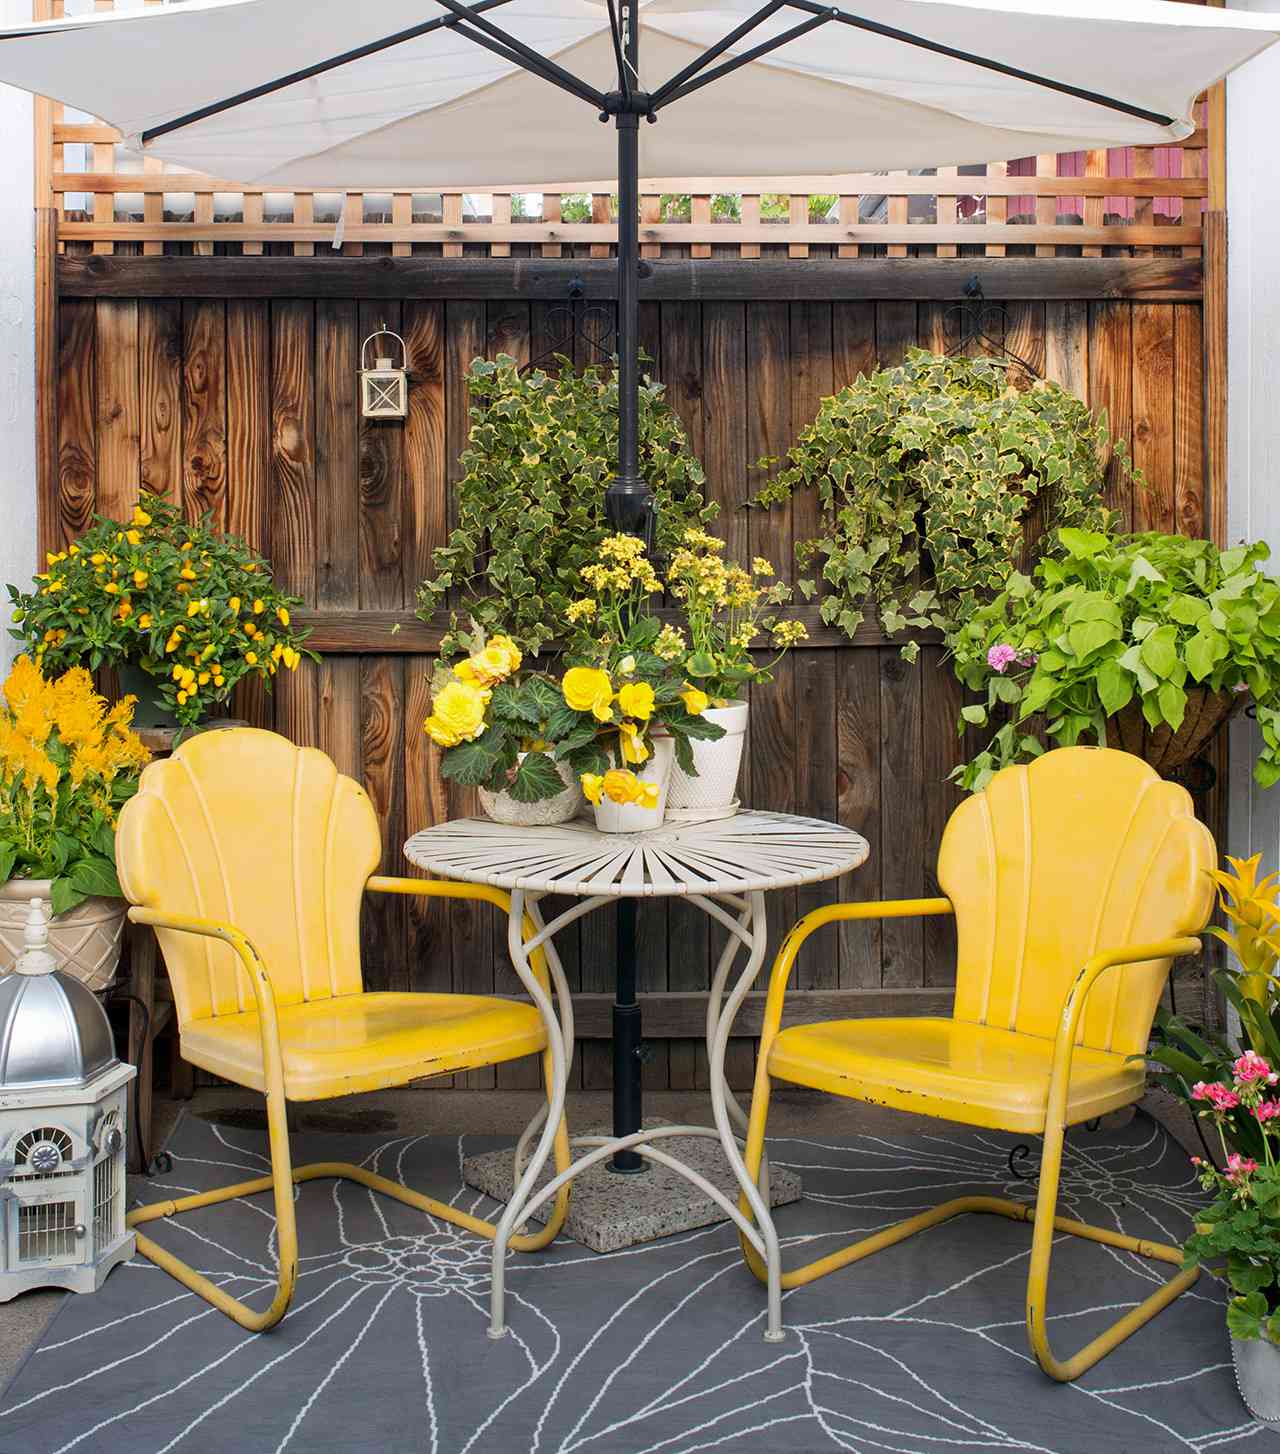 New Details About Decorate Outdoor Space